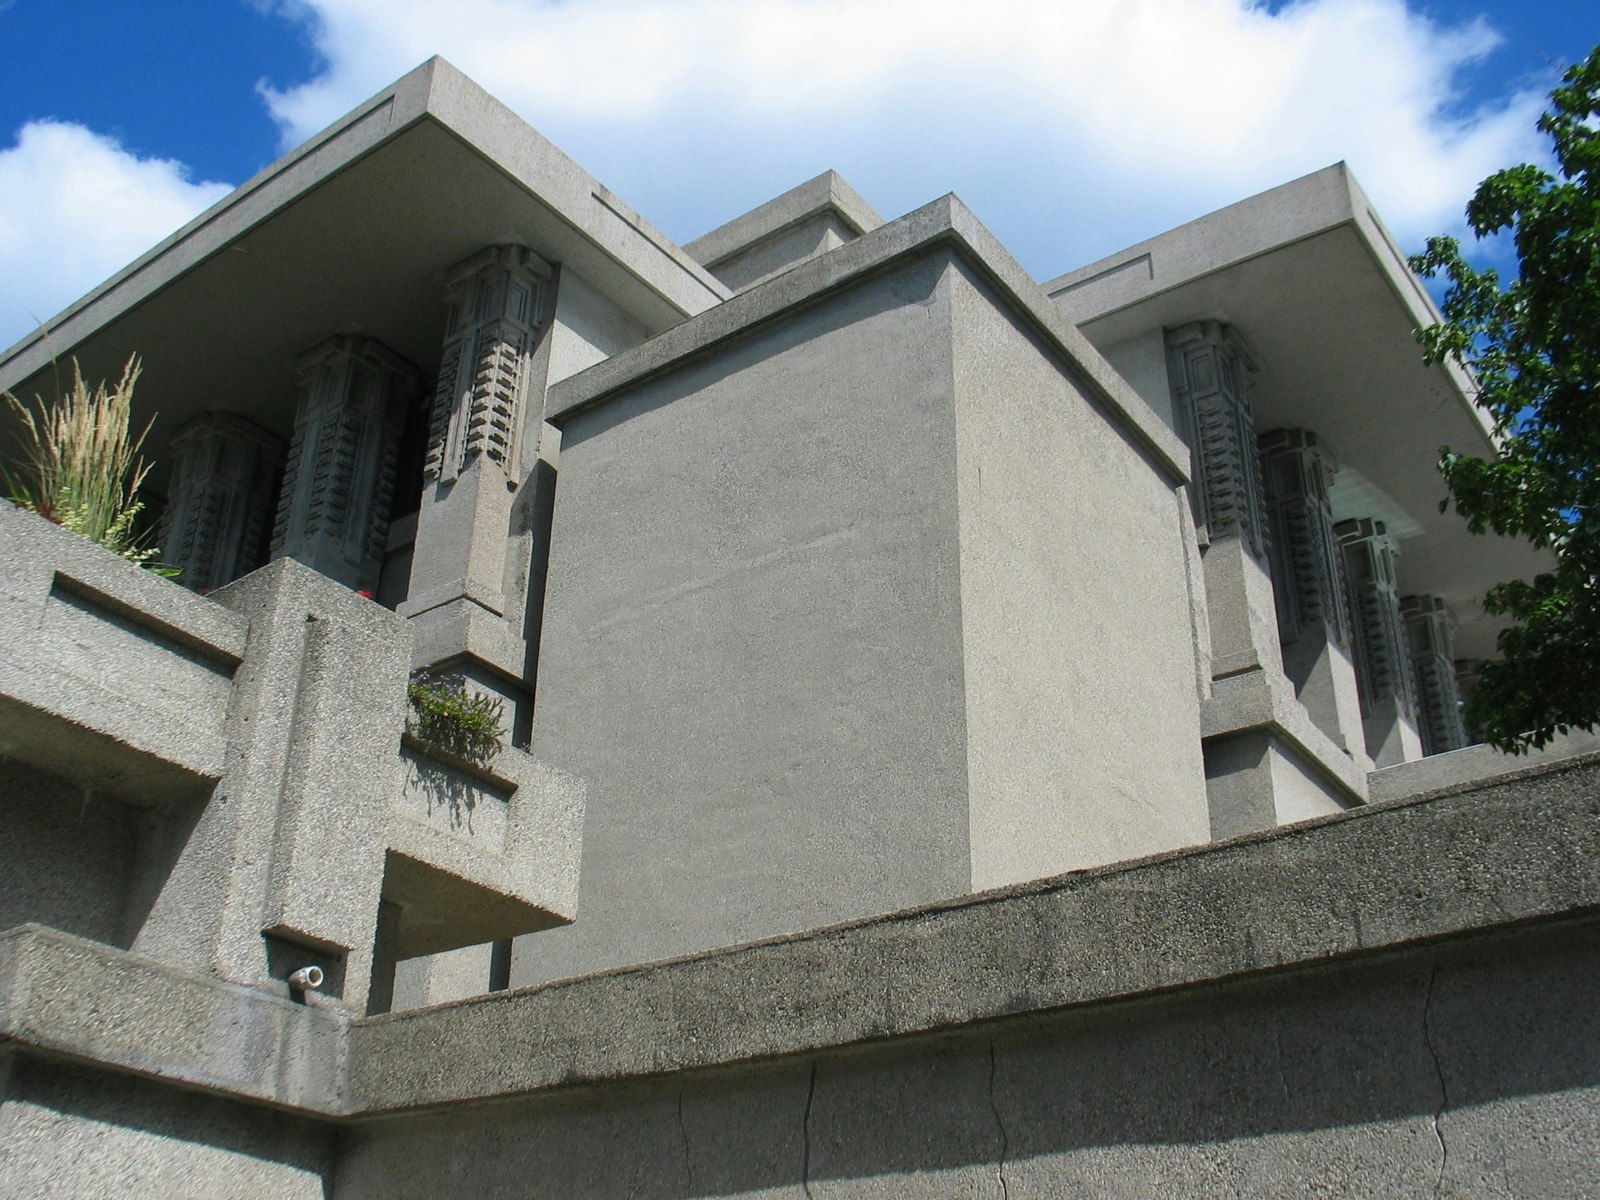 Concrete exterior of Unity Temple, designed by Frank Lloyd Wright, in Oak Park, Illinois